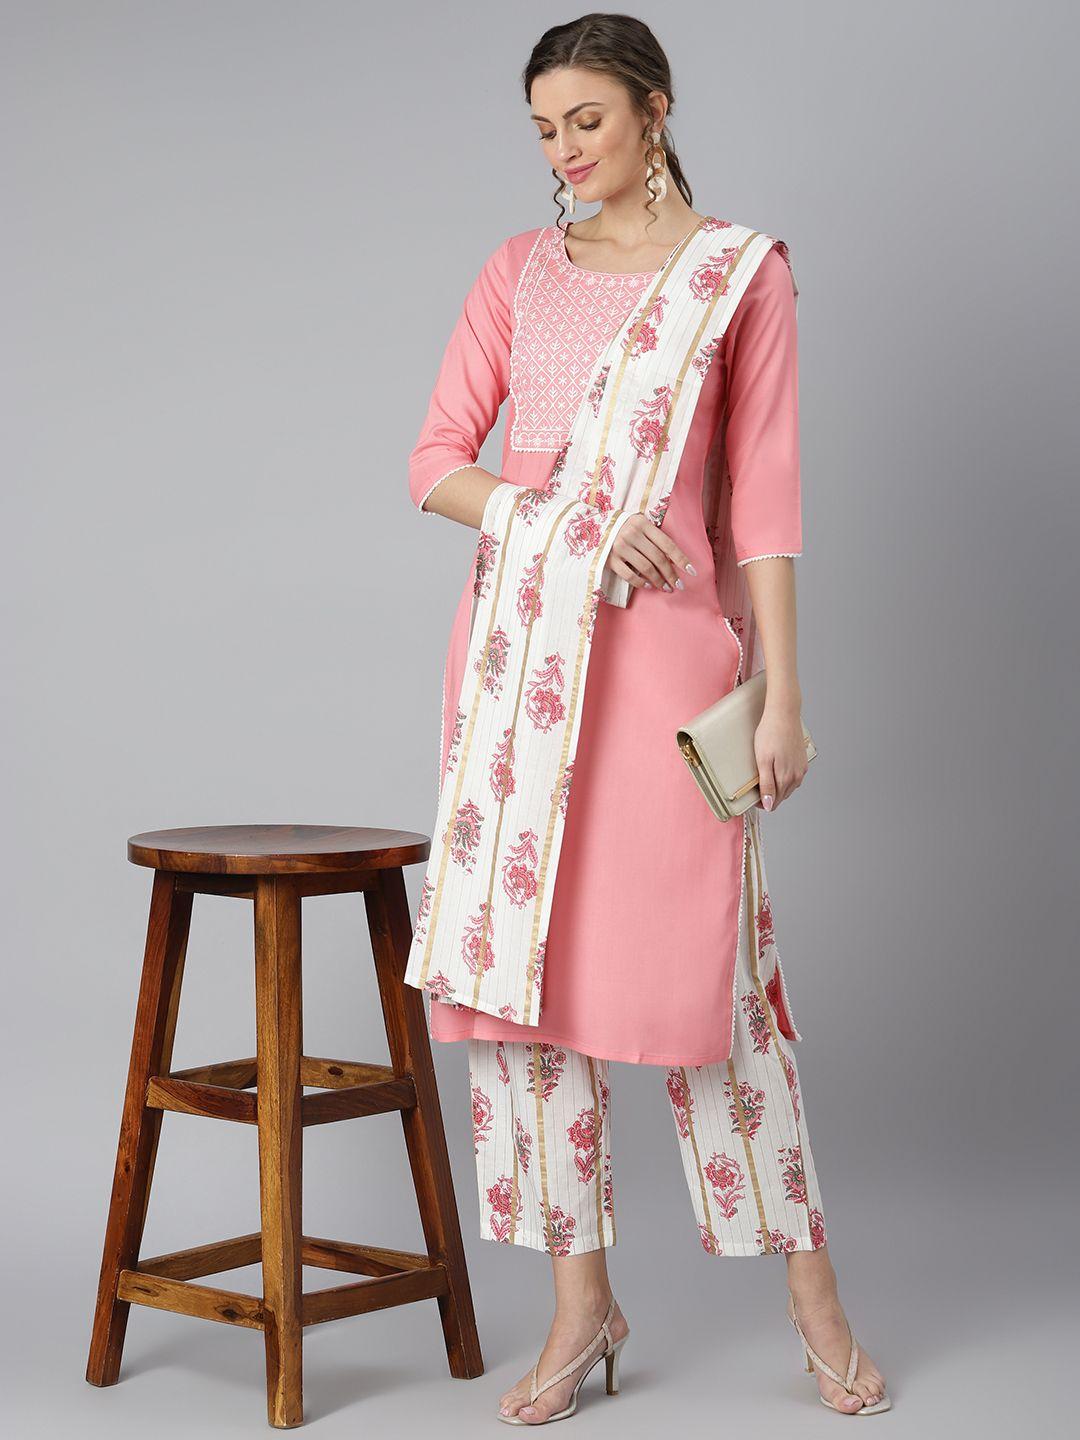 khushal k women floral embroidered thread work kurta with palazzos & dupatta